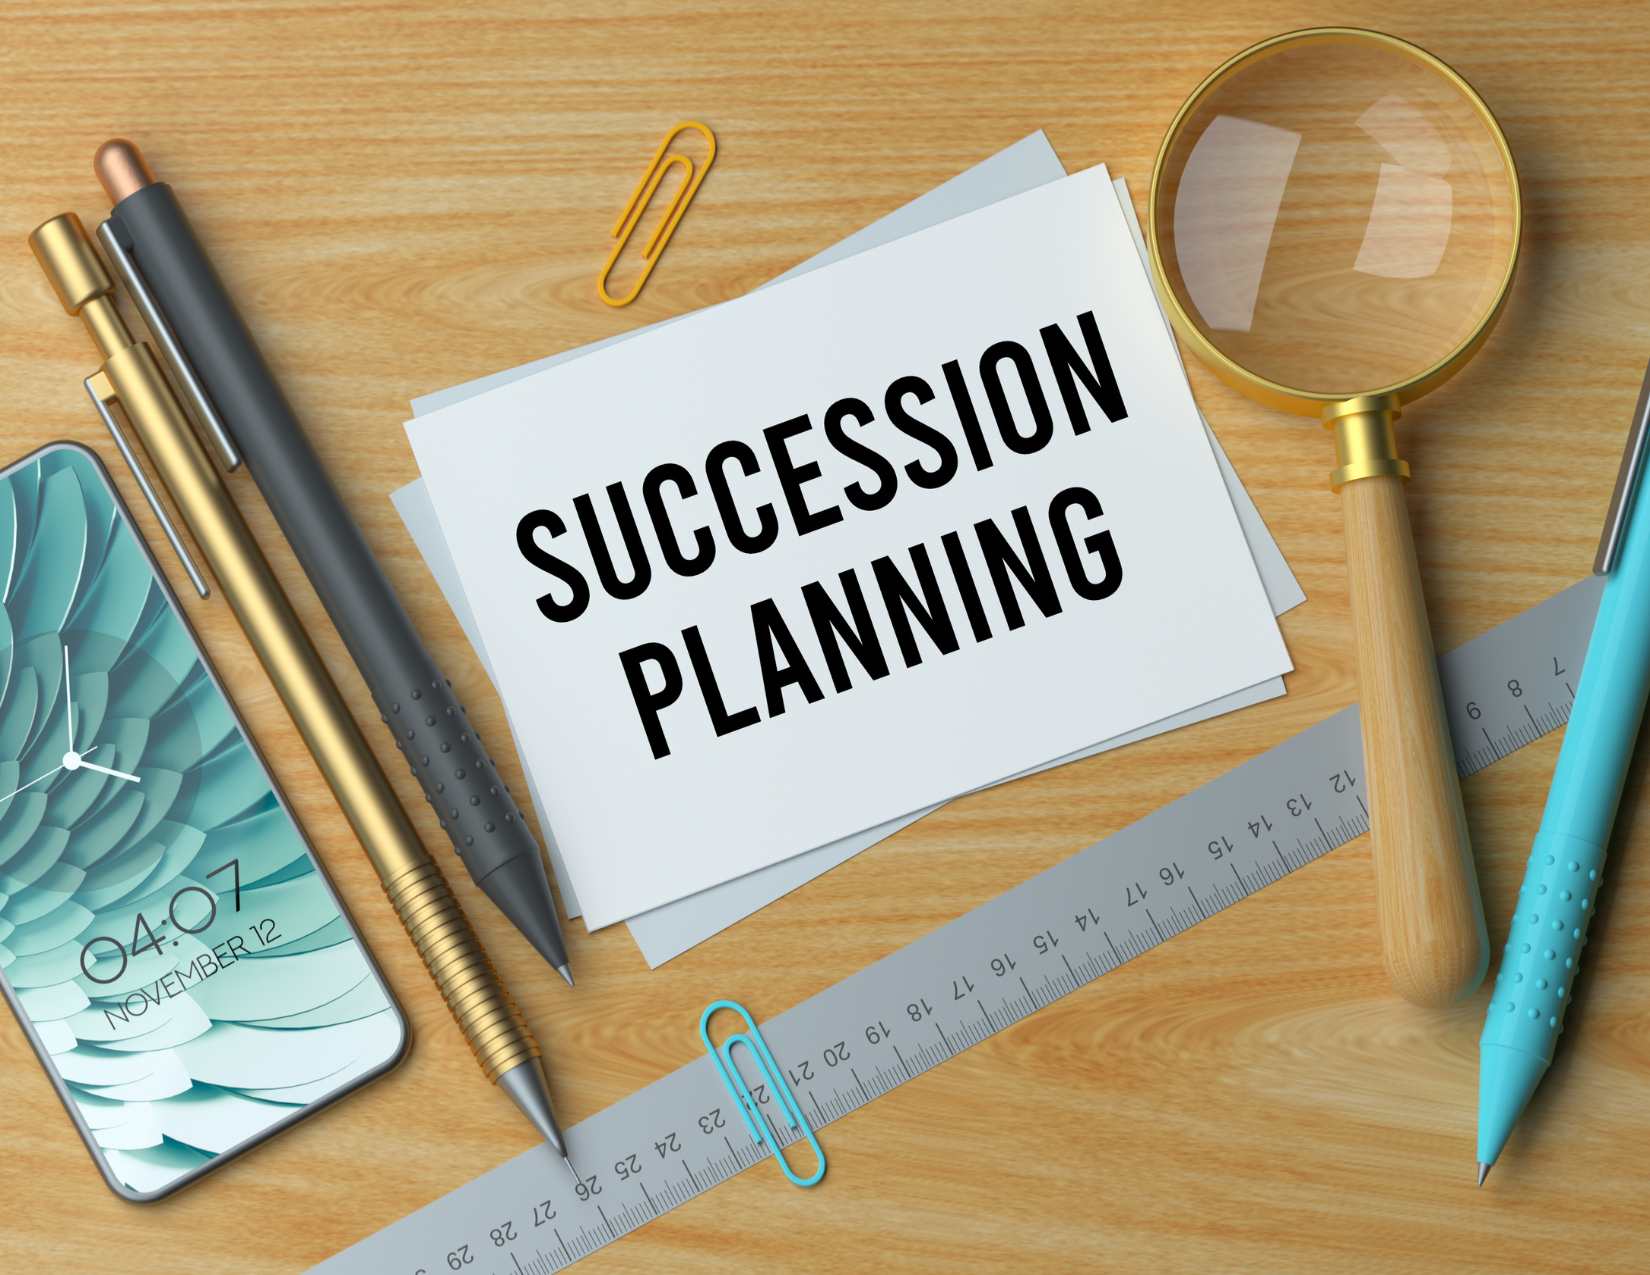 Love Your Business? Love Your Family? Then You Need a Succession Plan